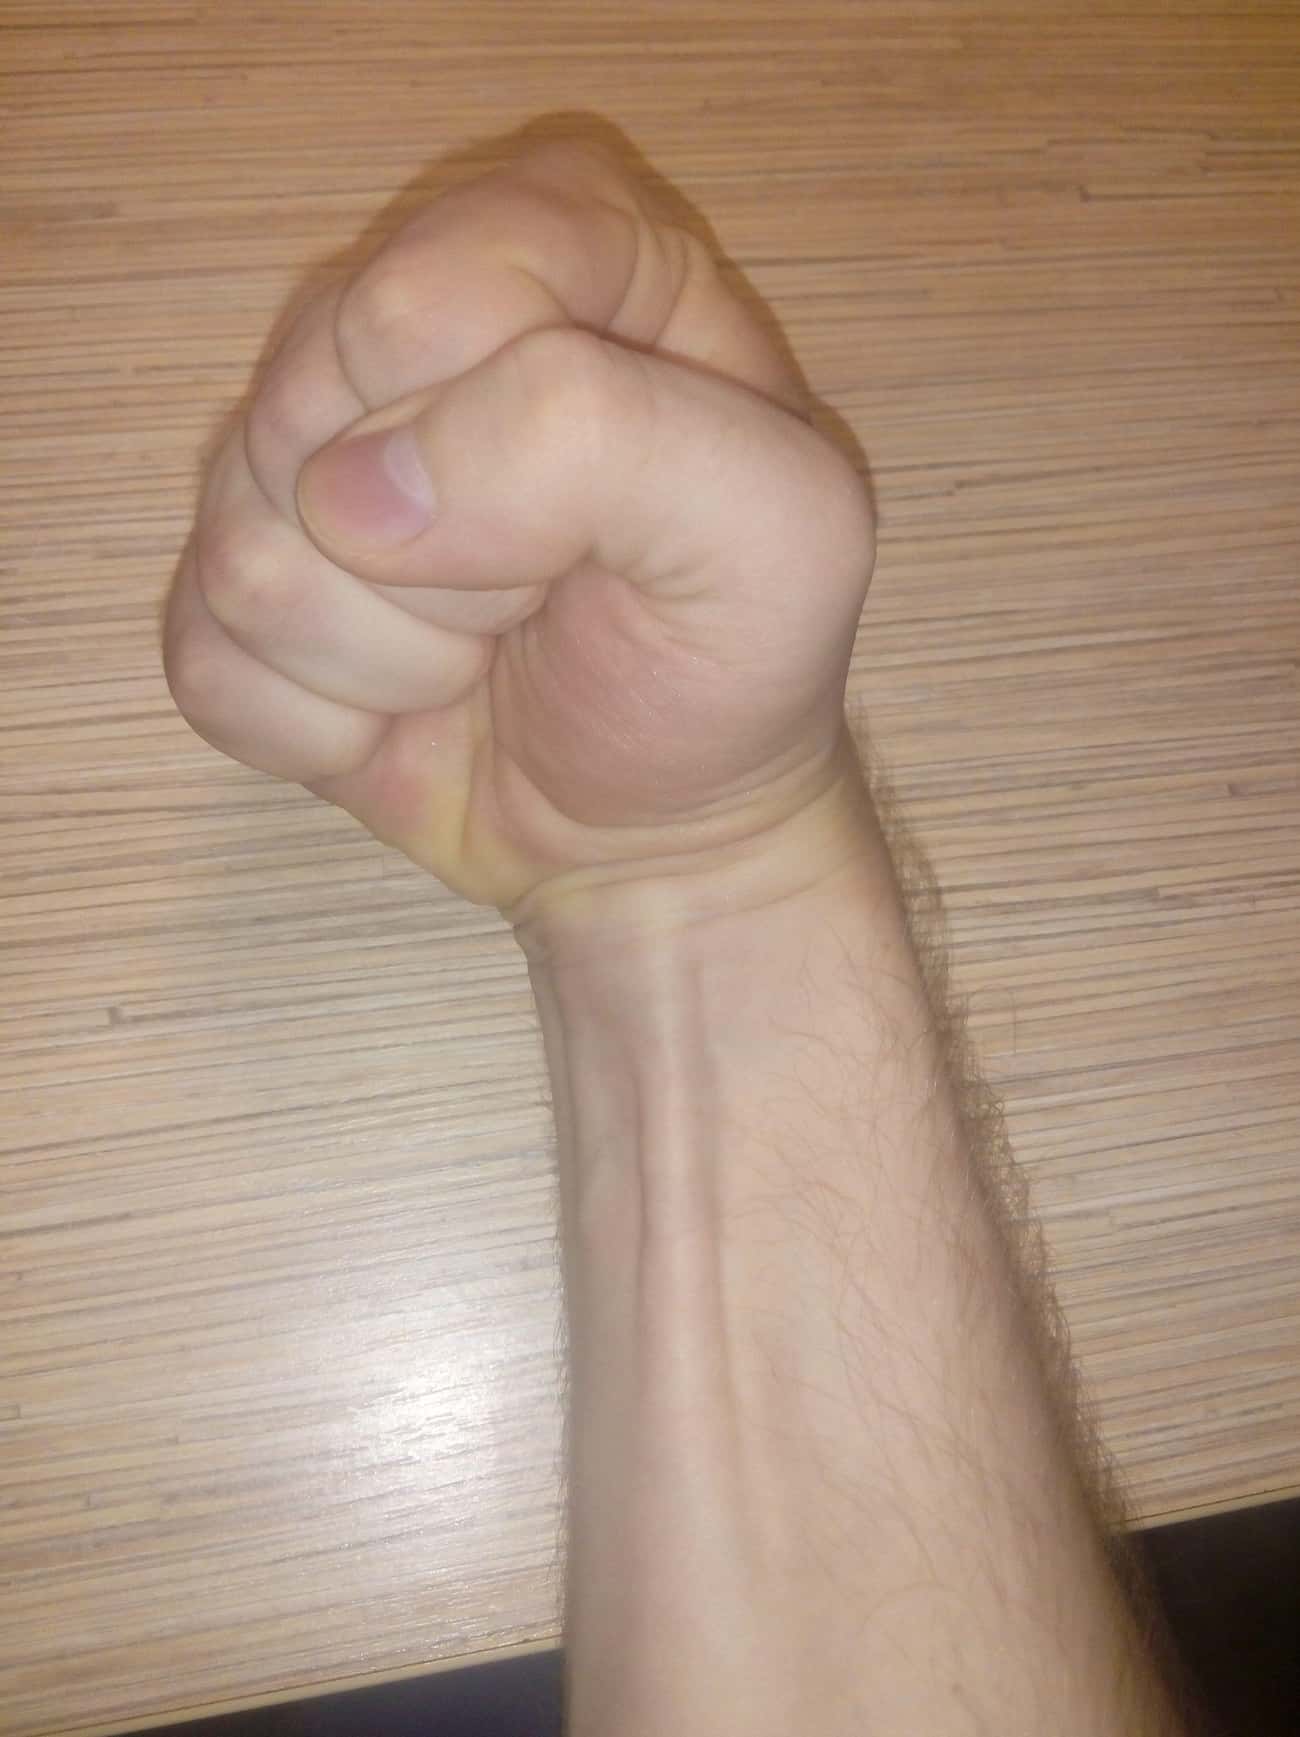 You Used To Have Incredibly Strong Wrists